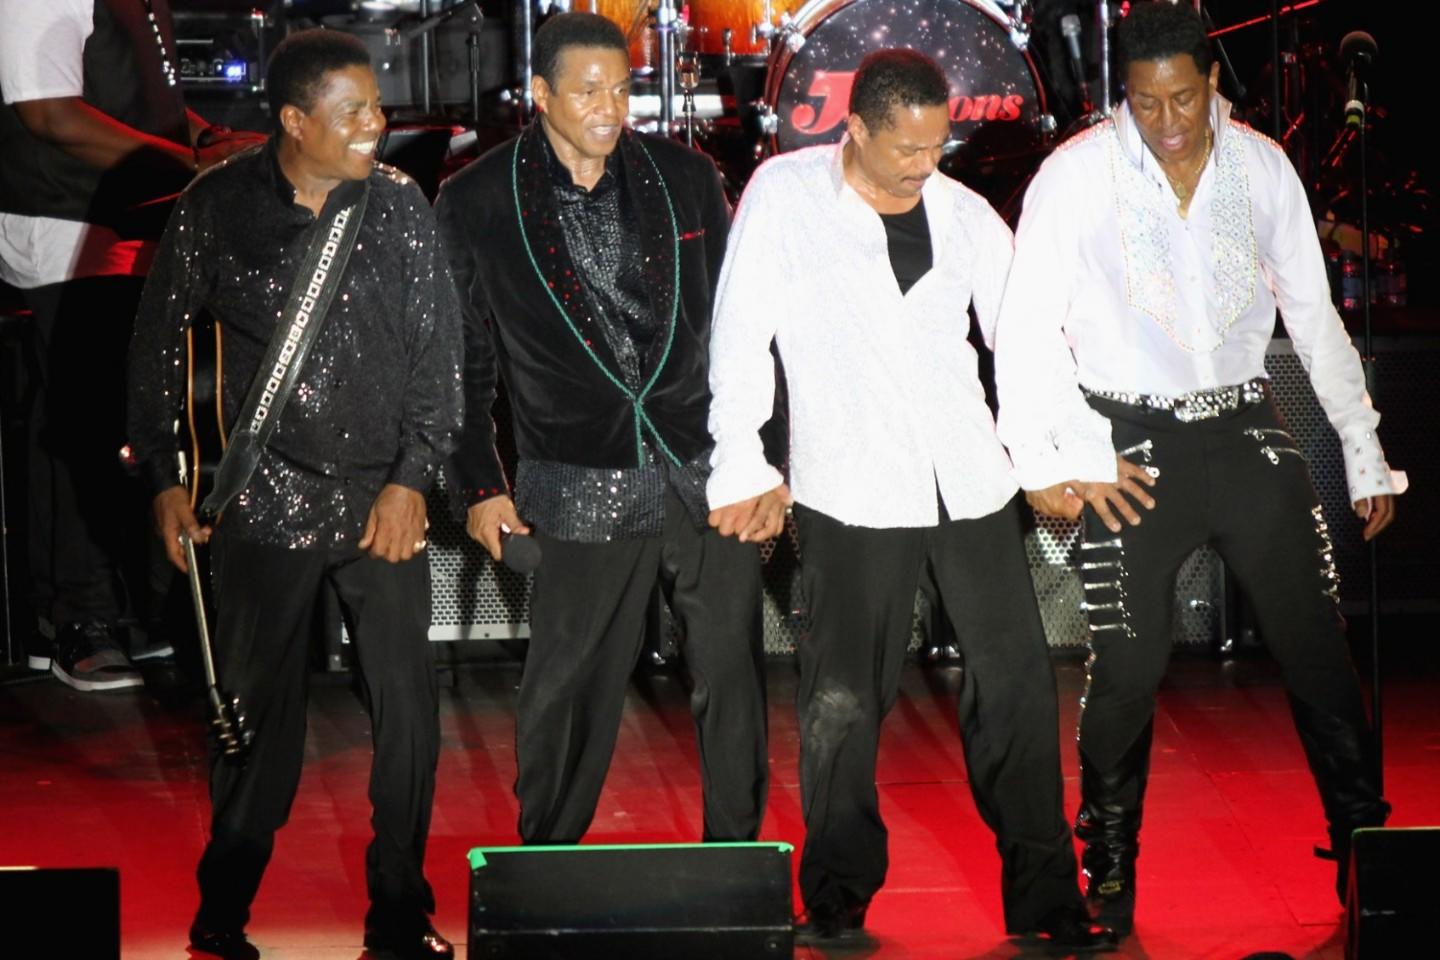 The Jacksons Tickets The Jacksons Tour Dates 2022 and Concert Tickets